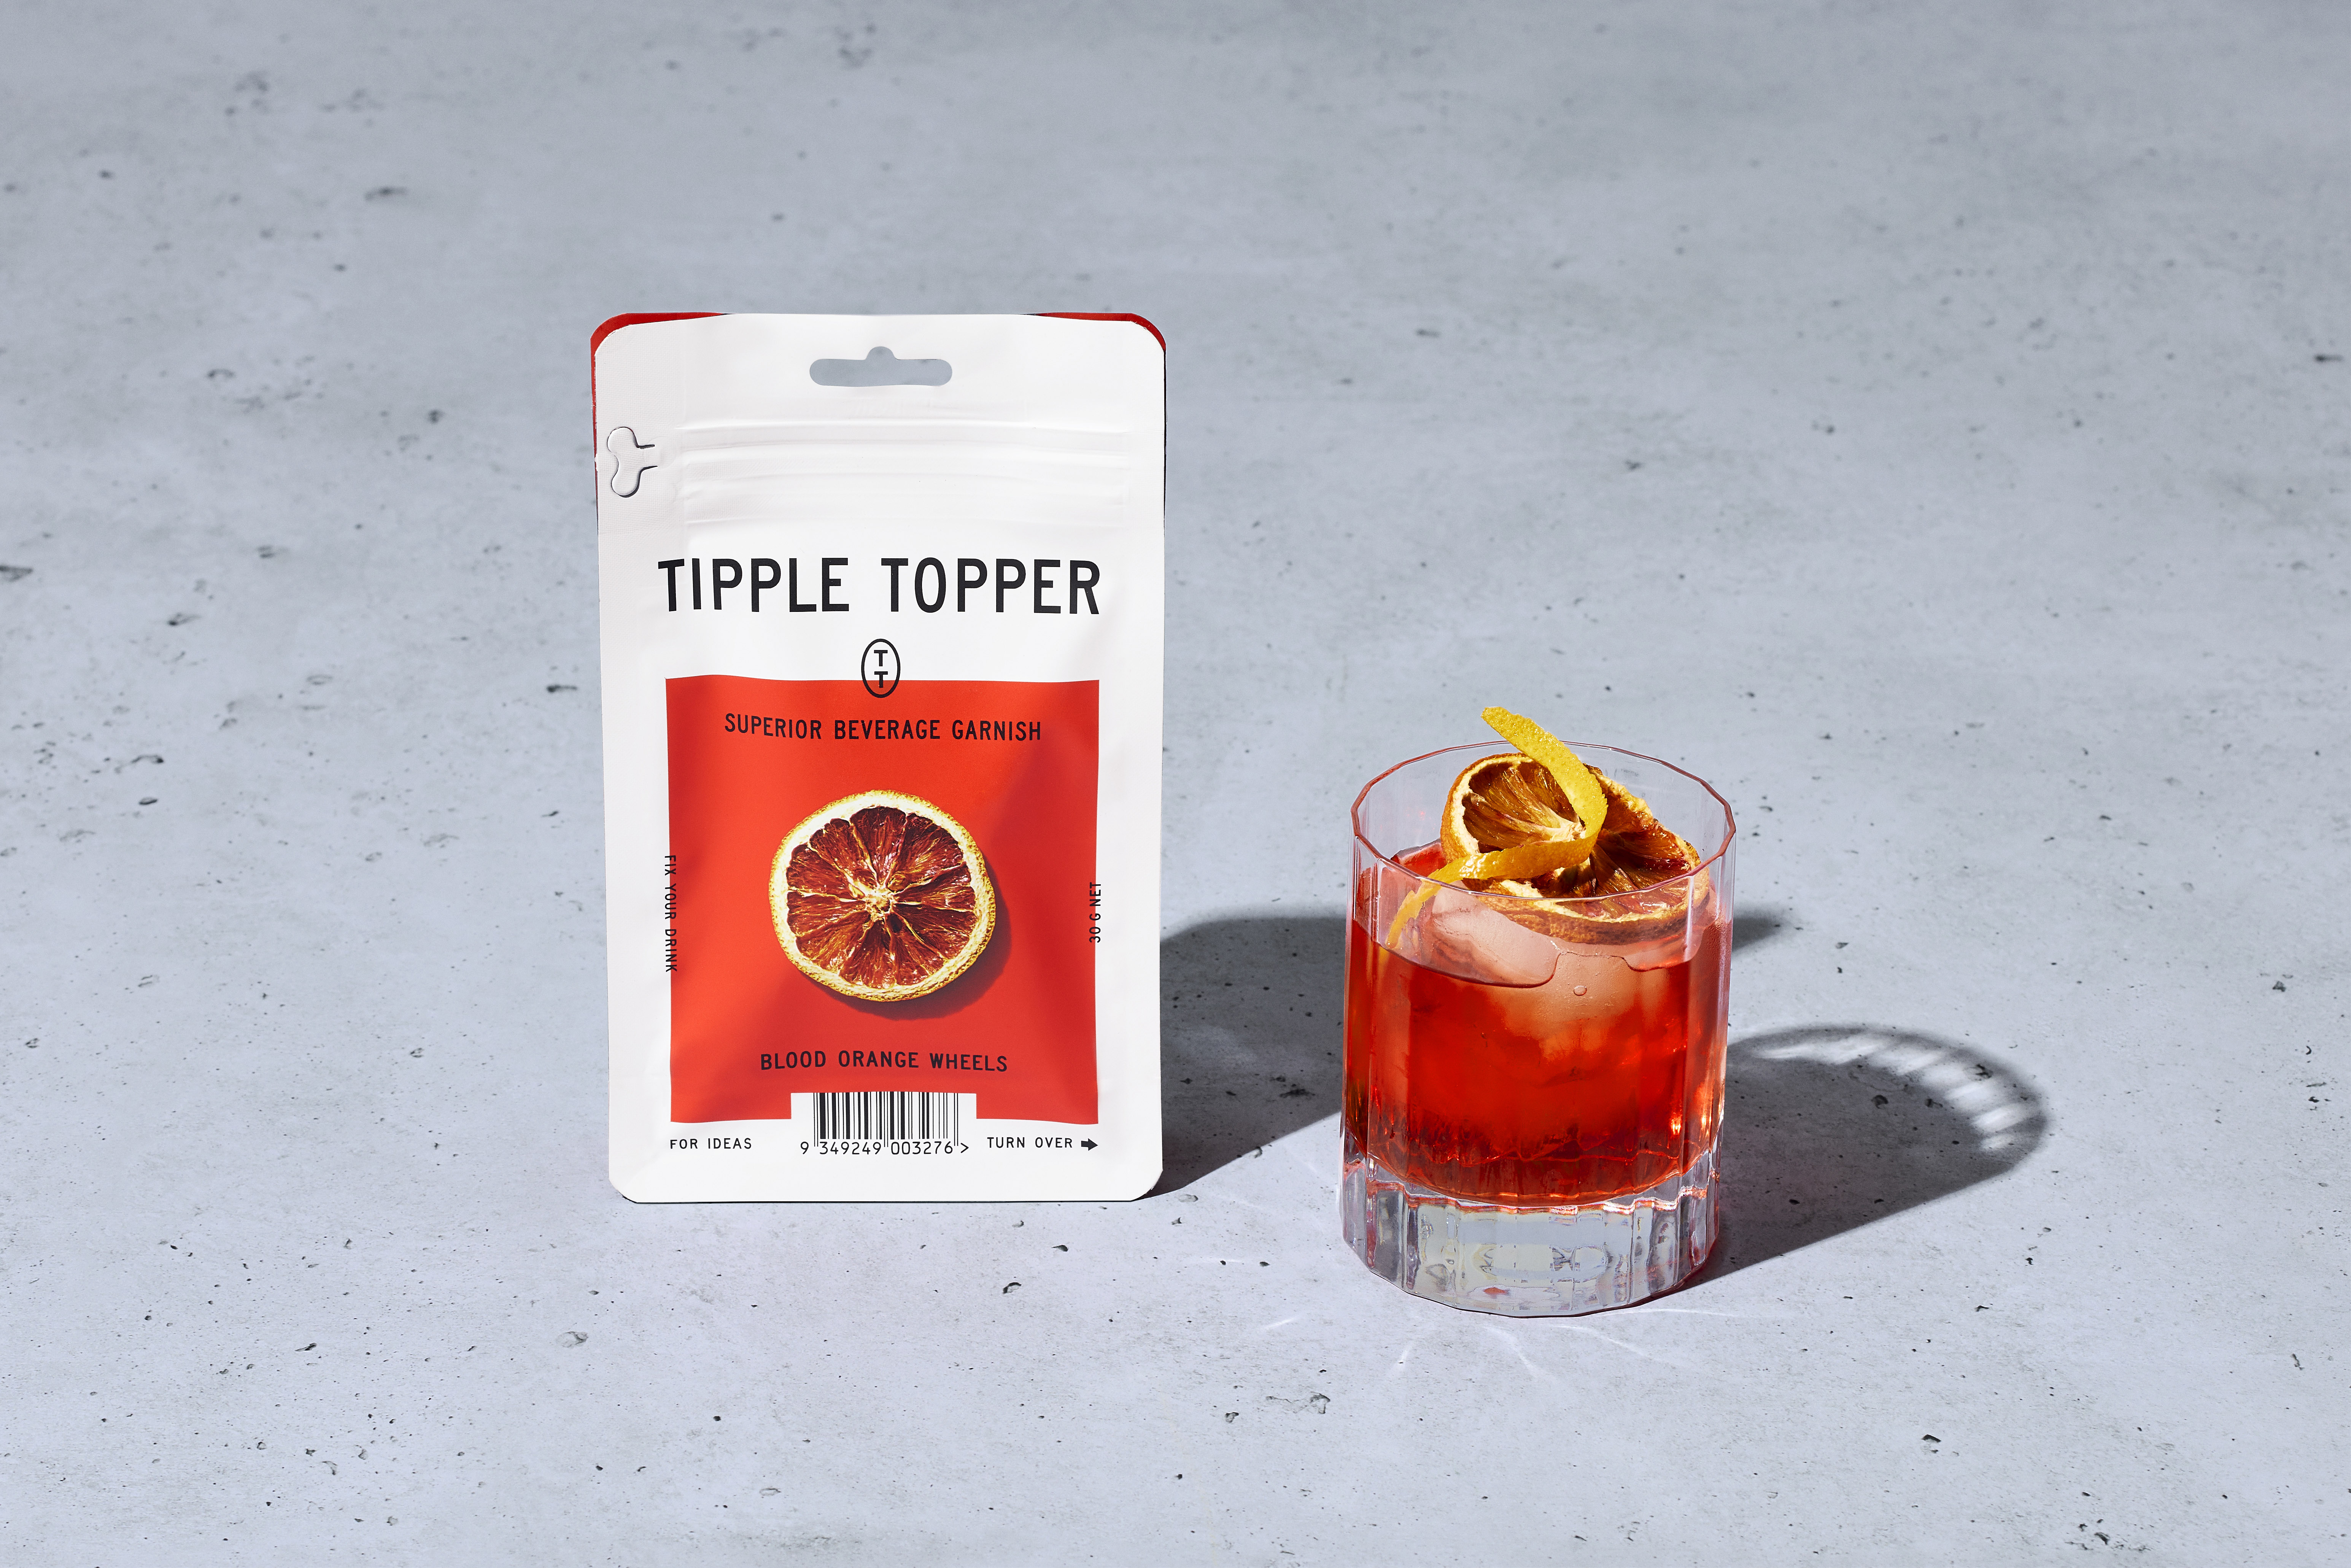 Brand identity, packaging design and art direction by Marx Design for Australian cocktail garnish brand Tipple Topper